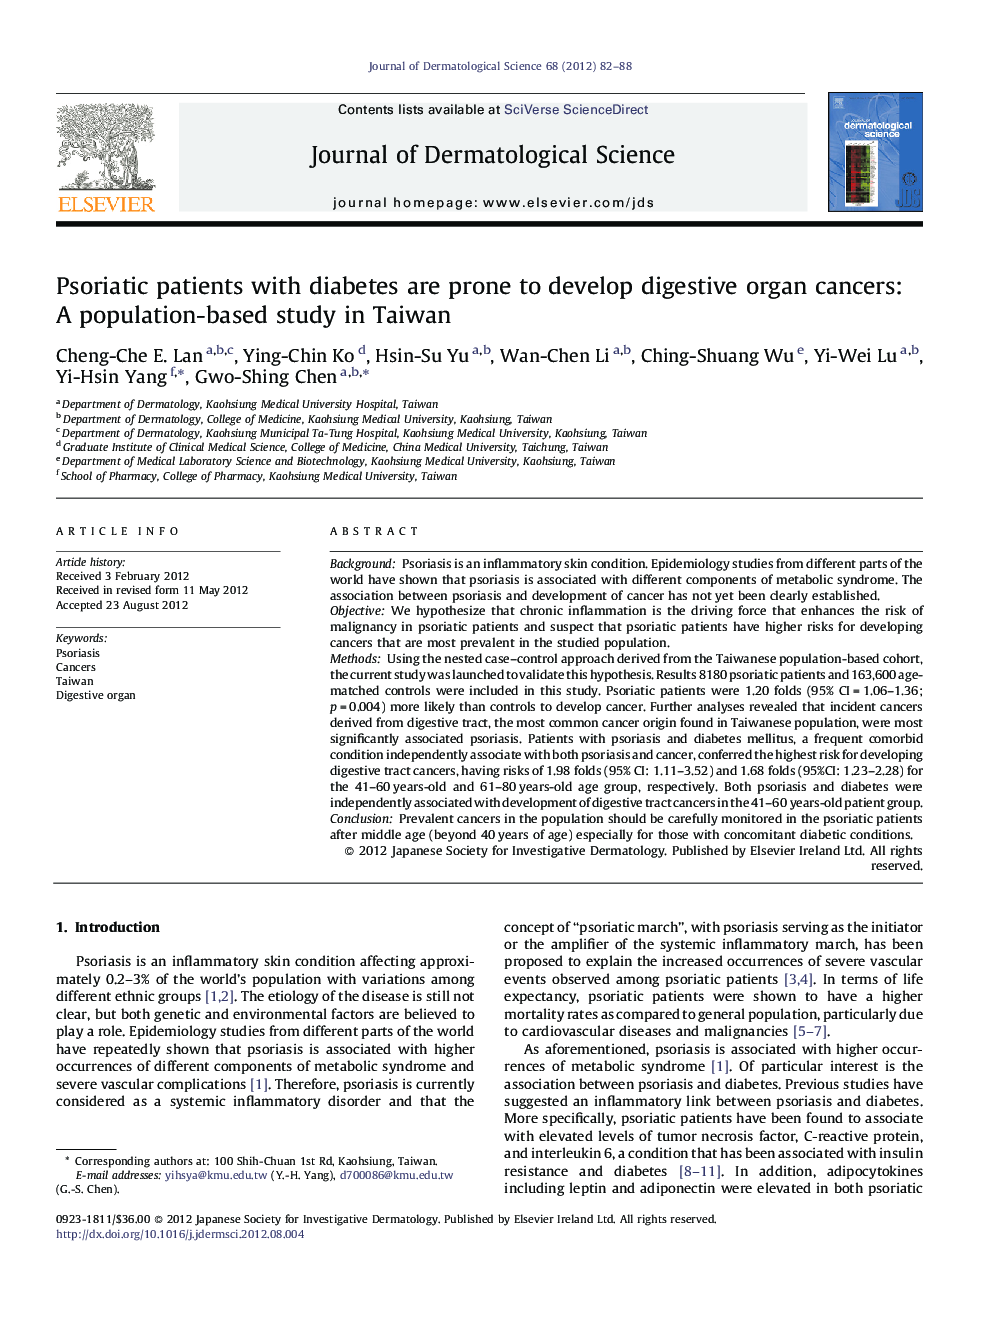 Psoriatic patients with diabetes are prone to develop digestive organ cancers: A population-based study in Taiwan